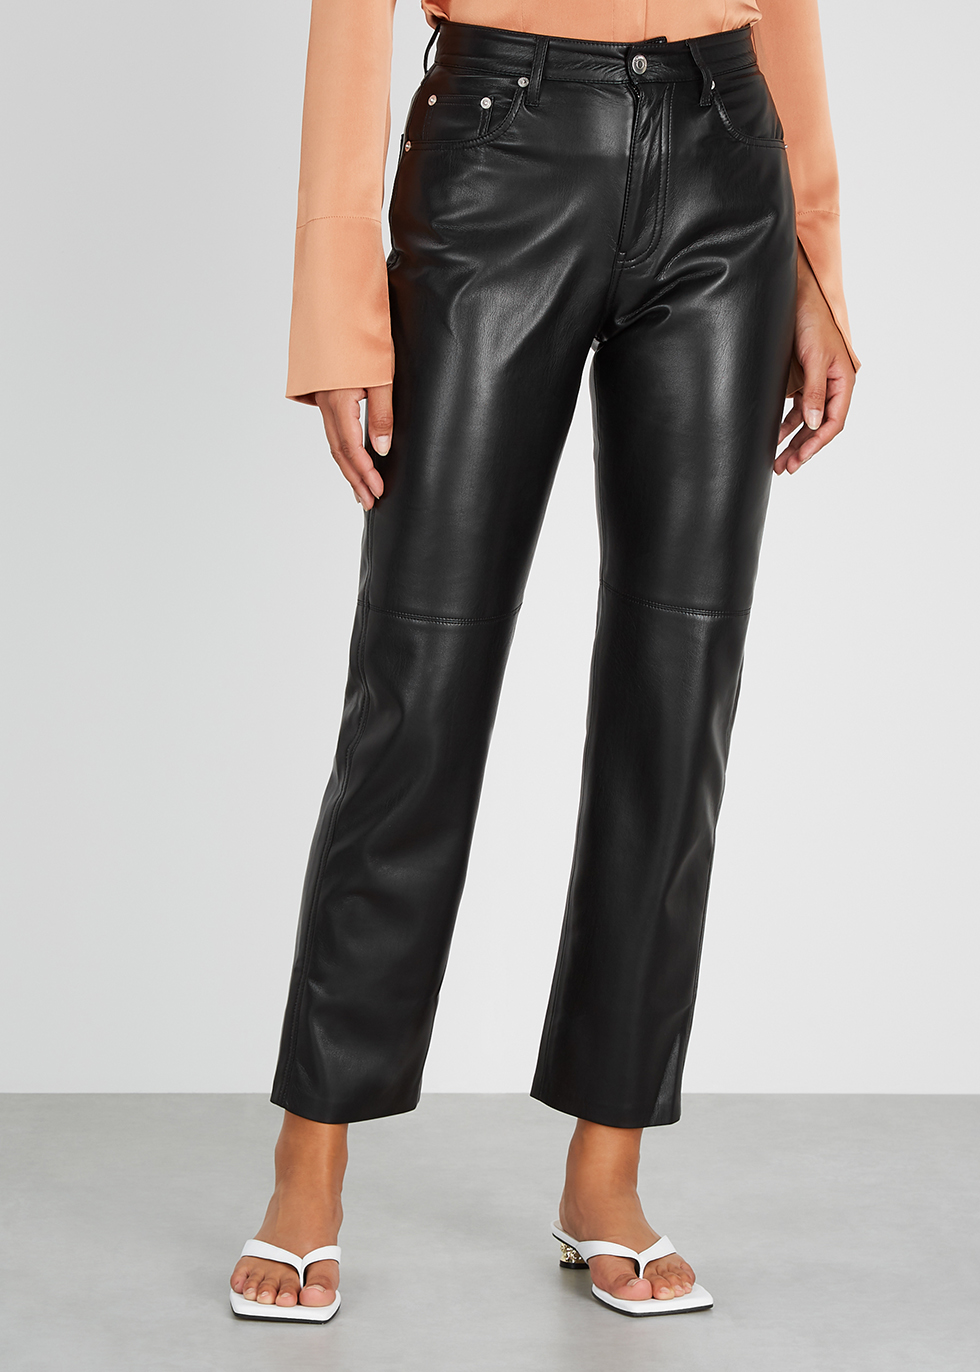 Update 69 Vegan Leather Trousers Best Incdgdbentre 4984